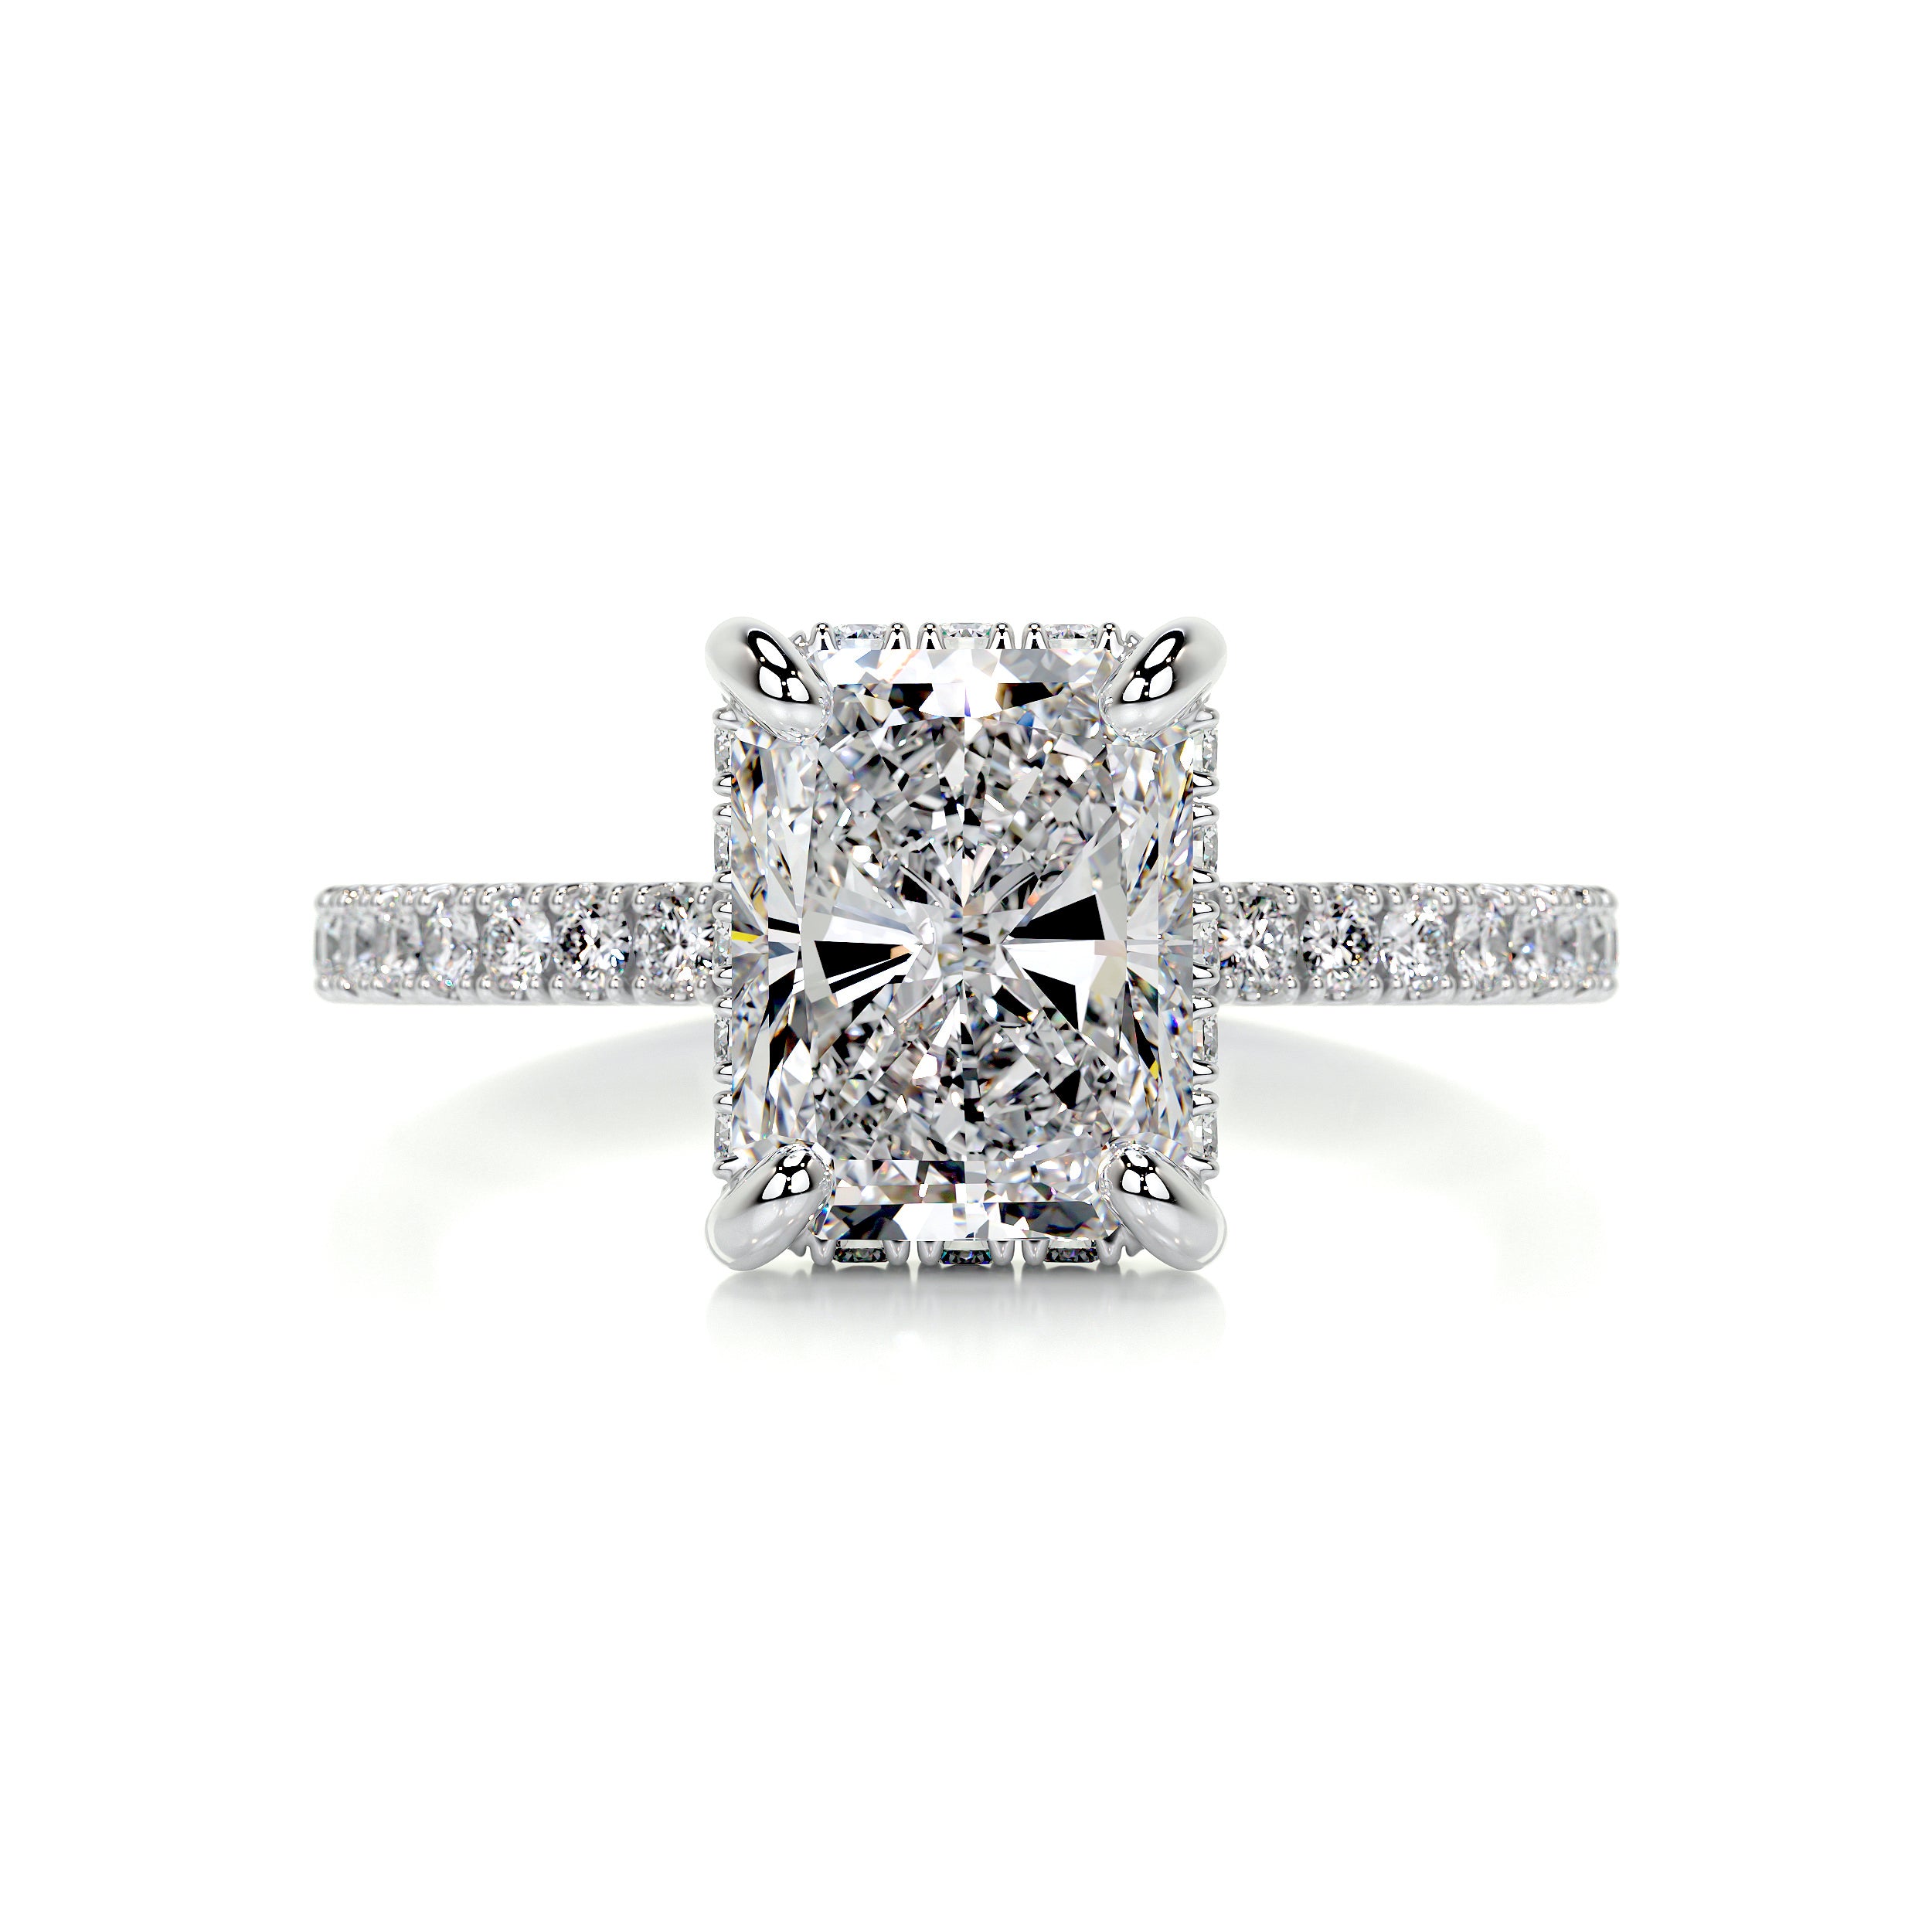 1 CT. T.W. Diamond Engagement Ring in 14K White Gold | Zales Outlet